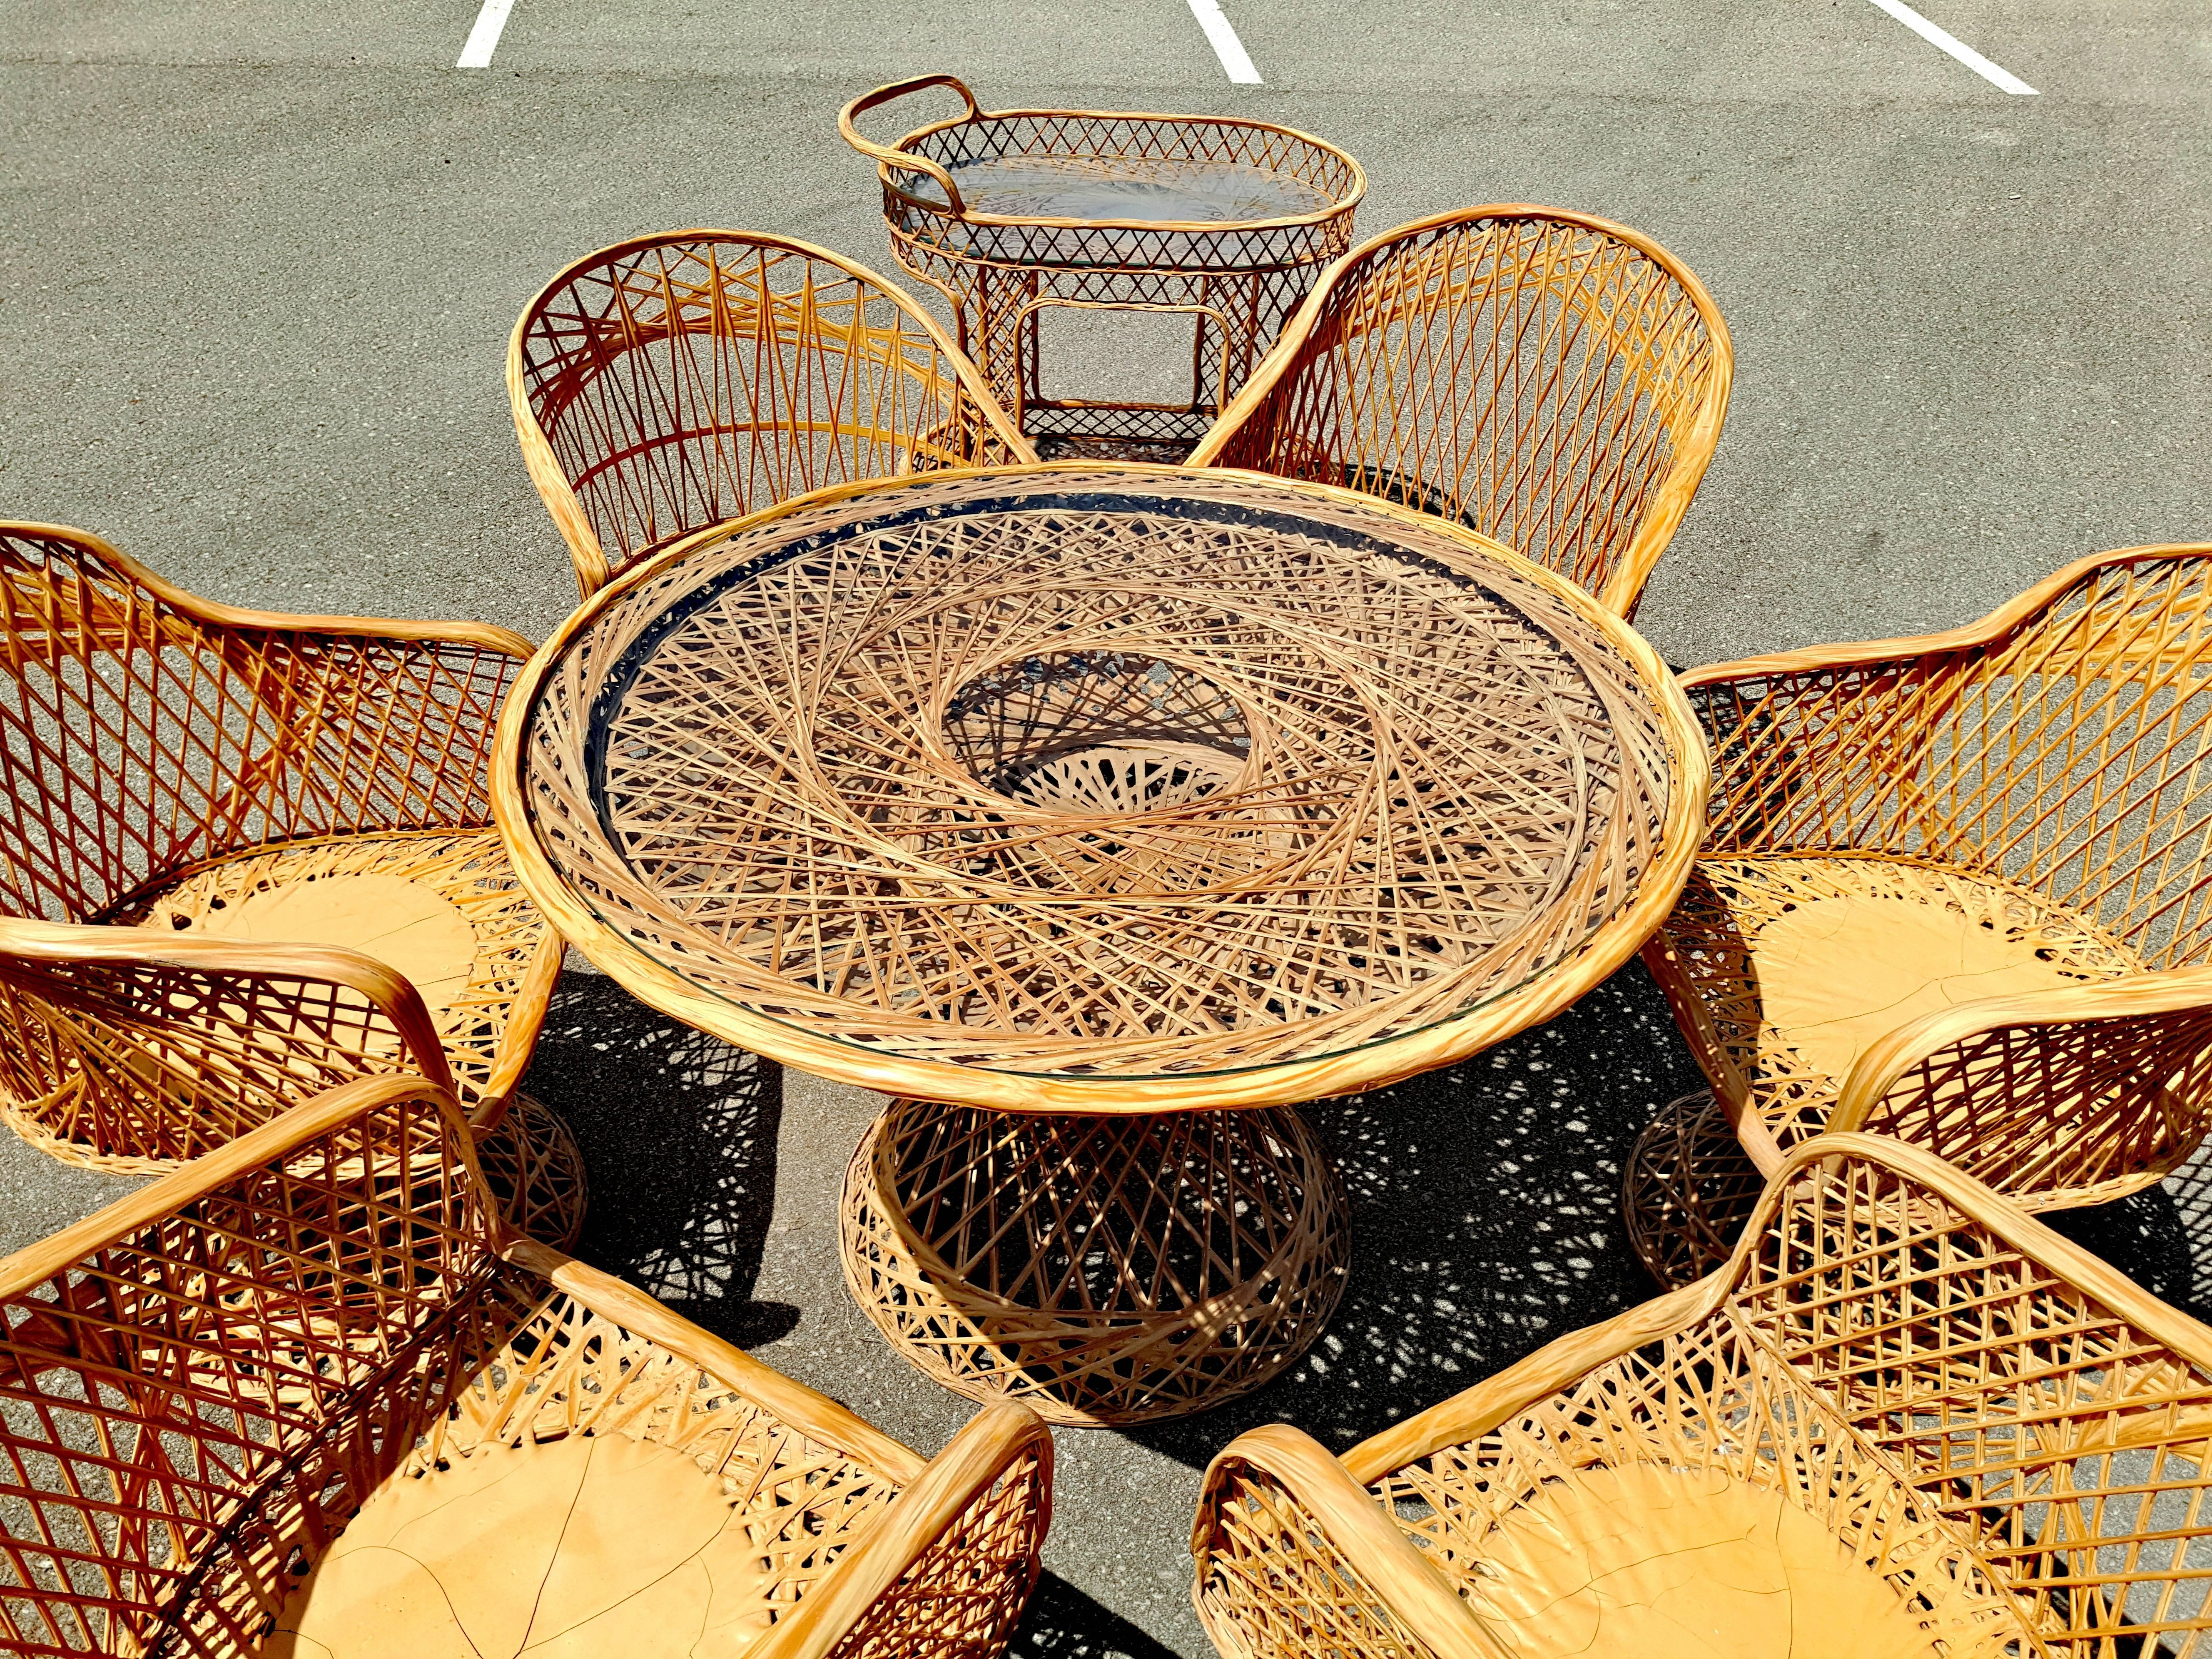 Rare full garden set by Russel Woodard circa 1960, manufactured in fiberglass rattan color, composed with one dining table, five swivel armchairs and one fix armchair and a beautiful bar trolley.
Table: D 114 cm, H 73cm
Swivel armchair: 62 W X 72